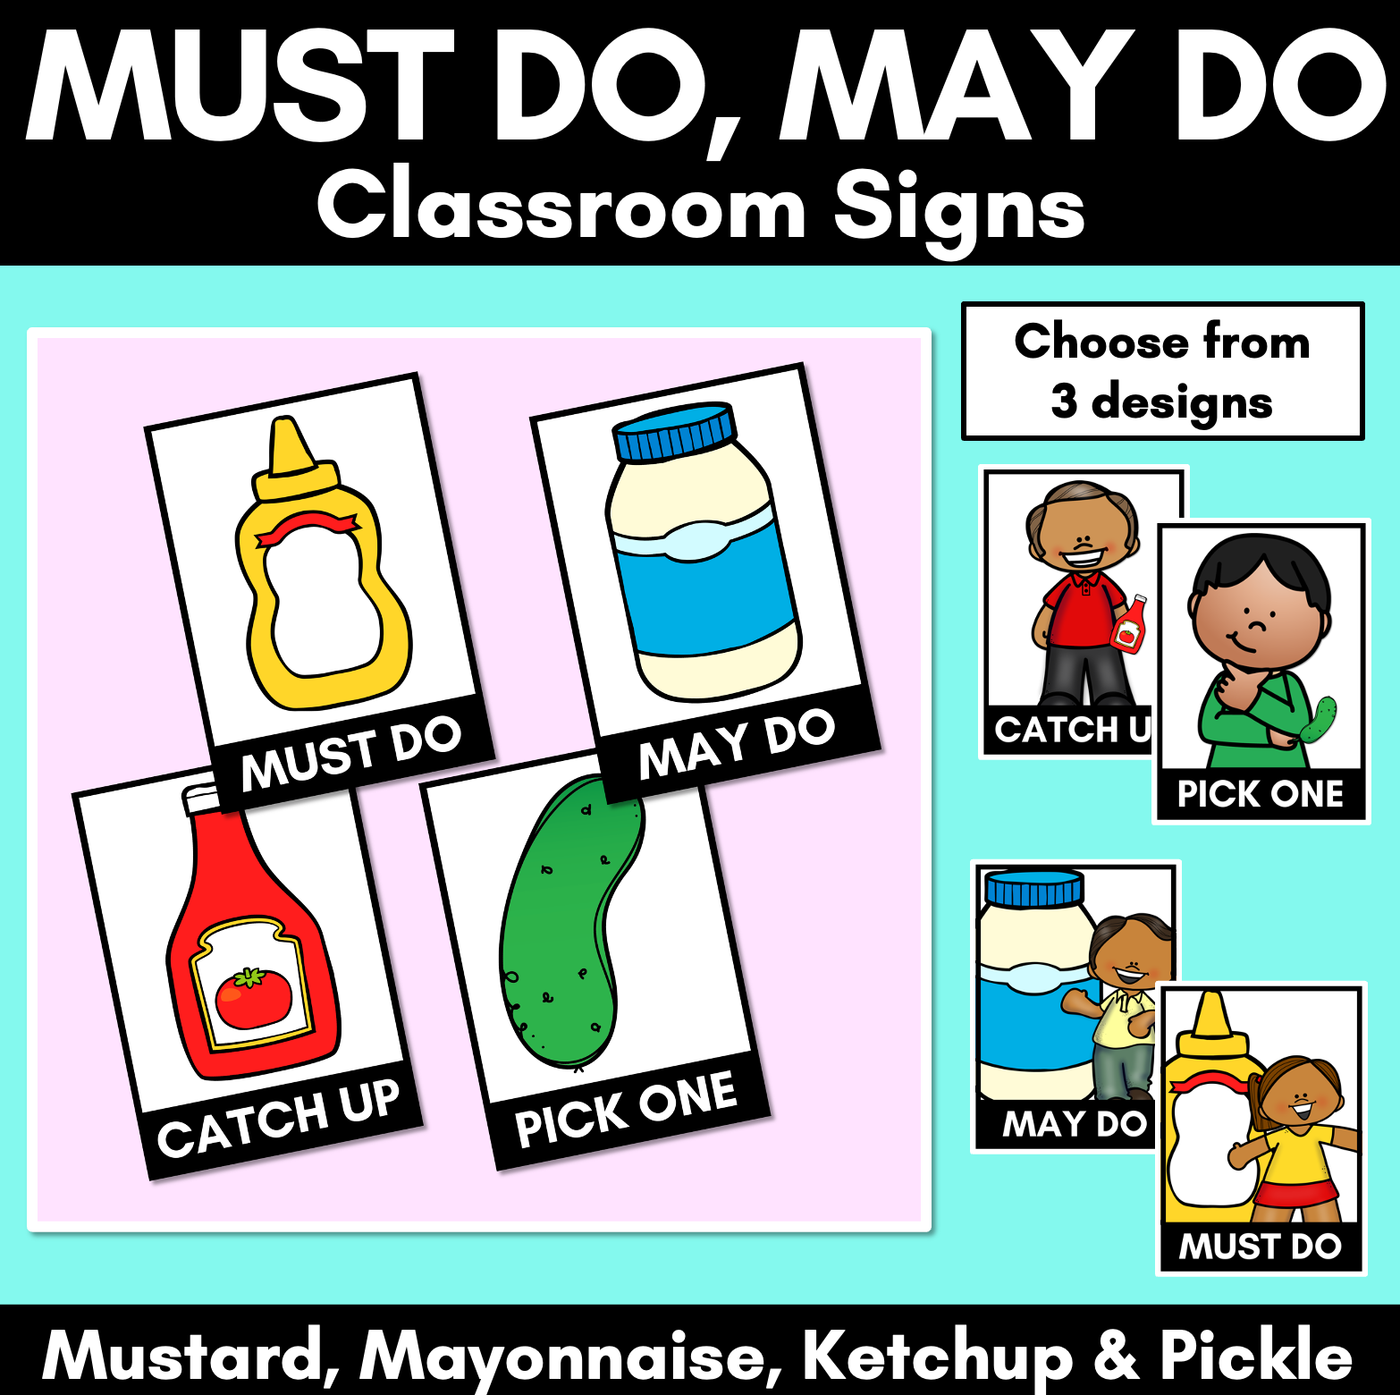 MUST DO MAY DO CATCH UP PICK ONE - Classroom Posters